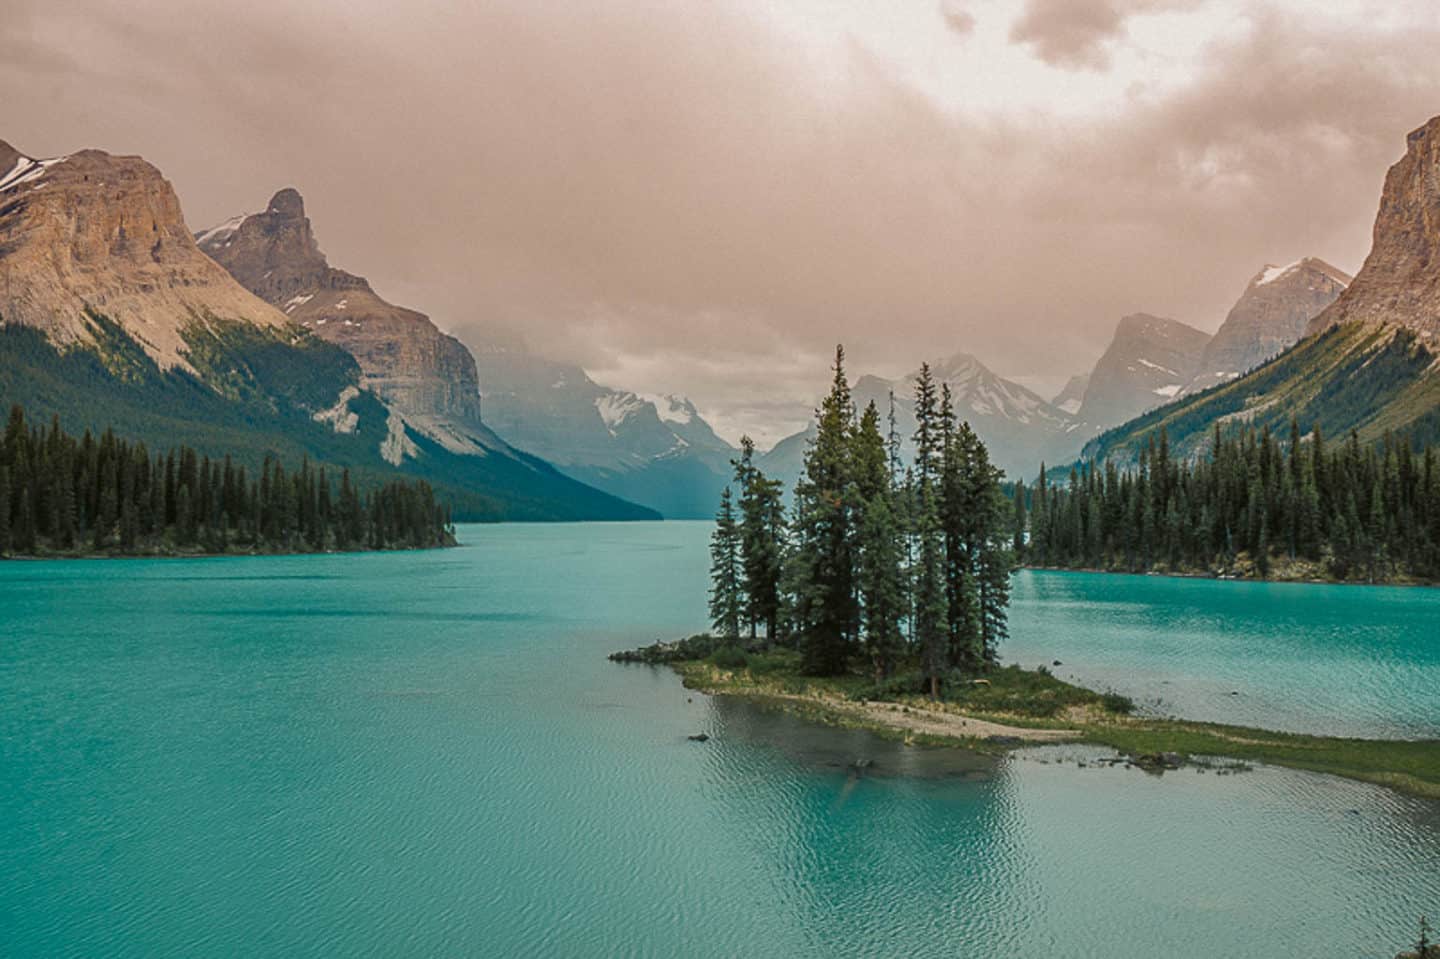 Jasper National Park is one of the most beautiful national parks in Canada